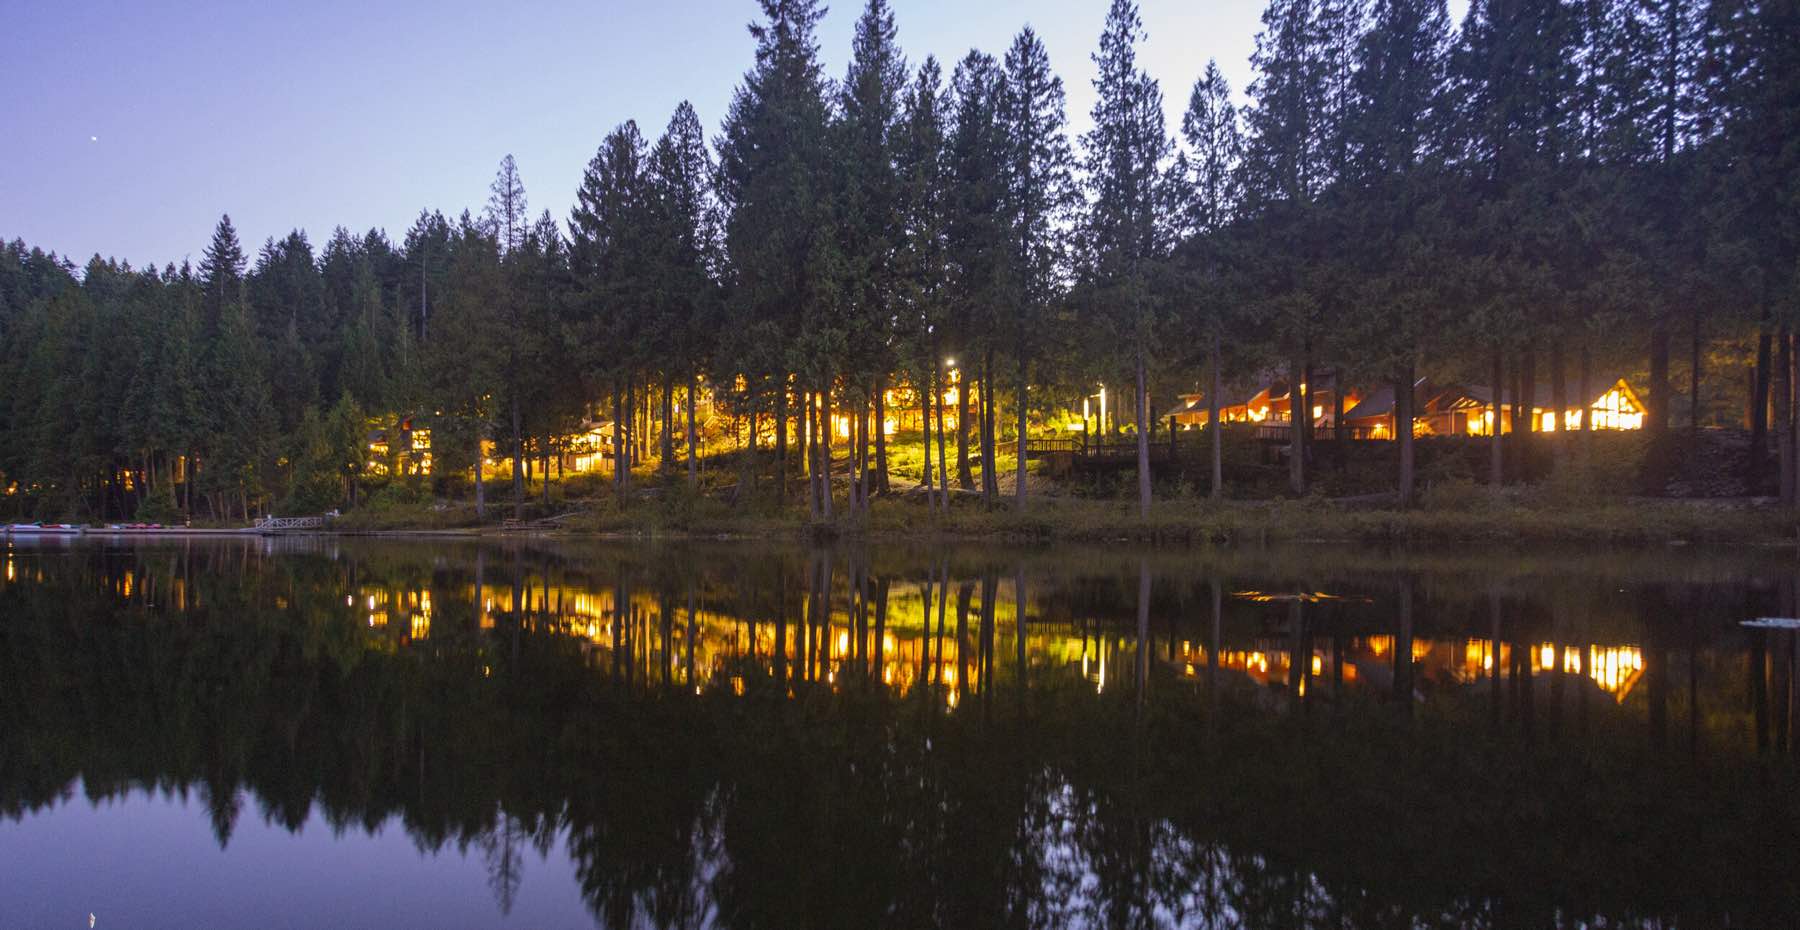 Lodge and Retreat Centre illuminated at dusk, reflecting in the lake